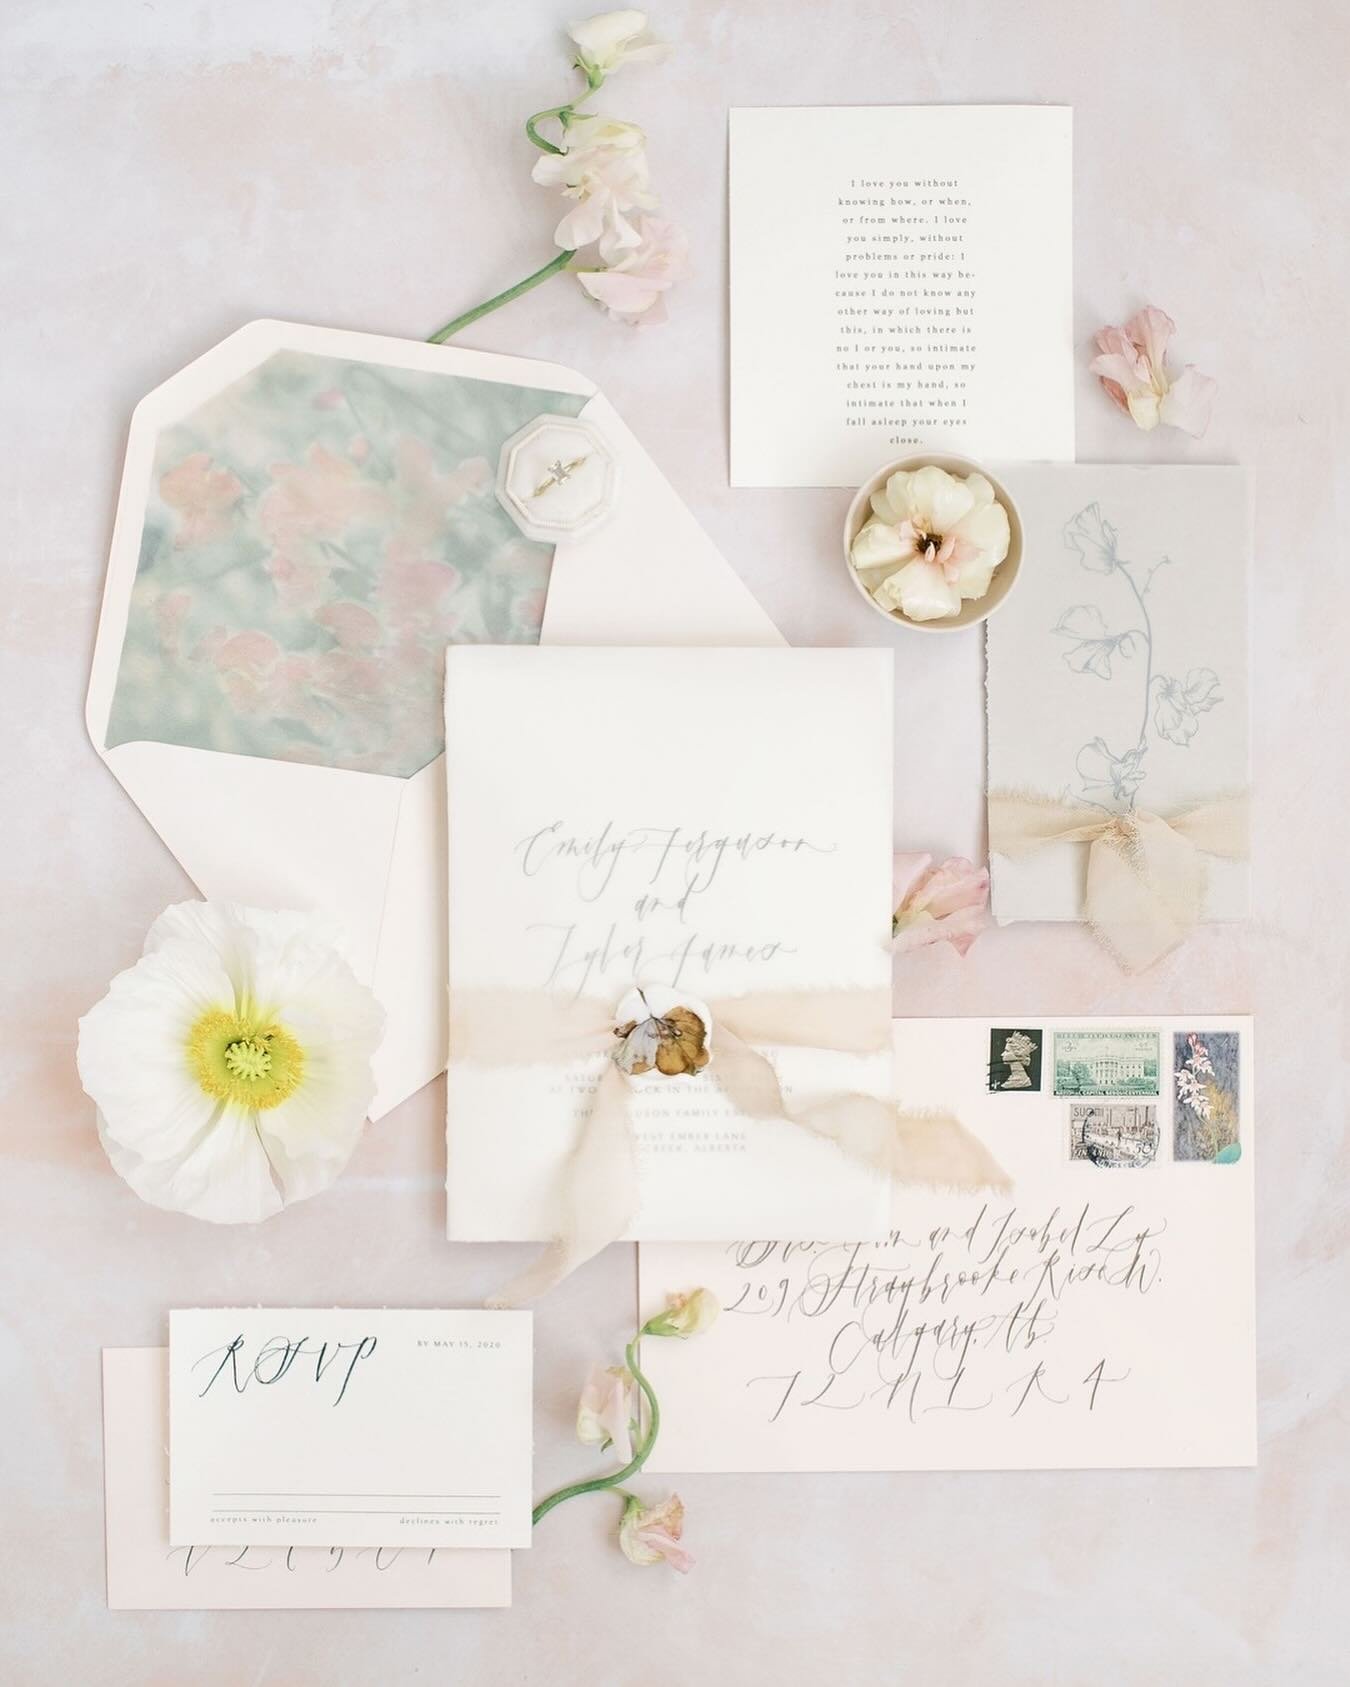 Simple, playful, yet utterly sophisticated, these invites are a breath of fresh air as we officially move into Spring! 🌷 
⠀⠀⠀⠀⠀⠀⠀⠀⠀
Spring blooms are just around the corner, and we can&rsquo;t wait! Who else is counting down the days to flower-fille